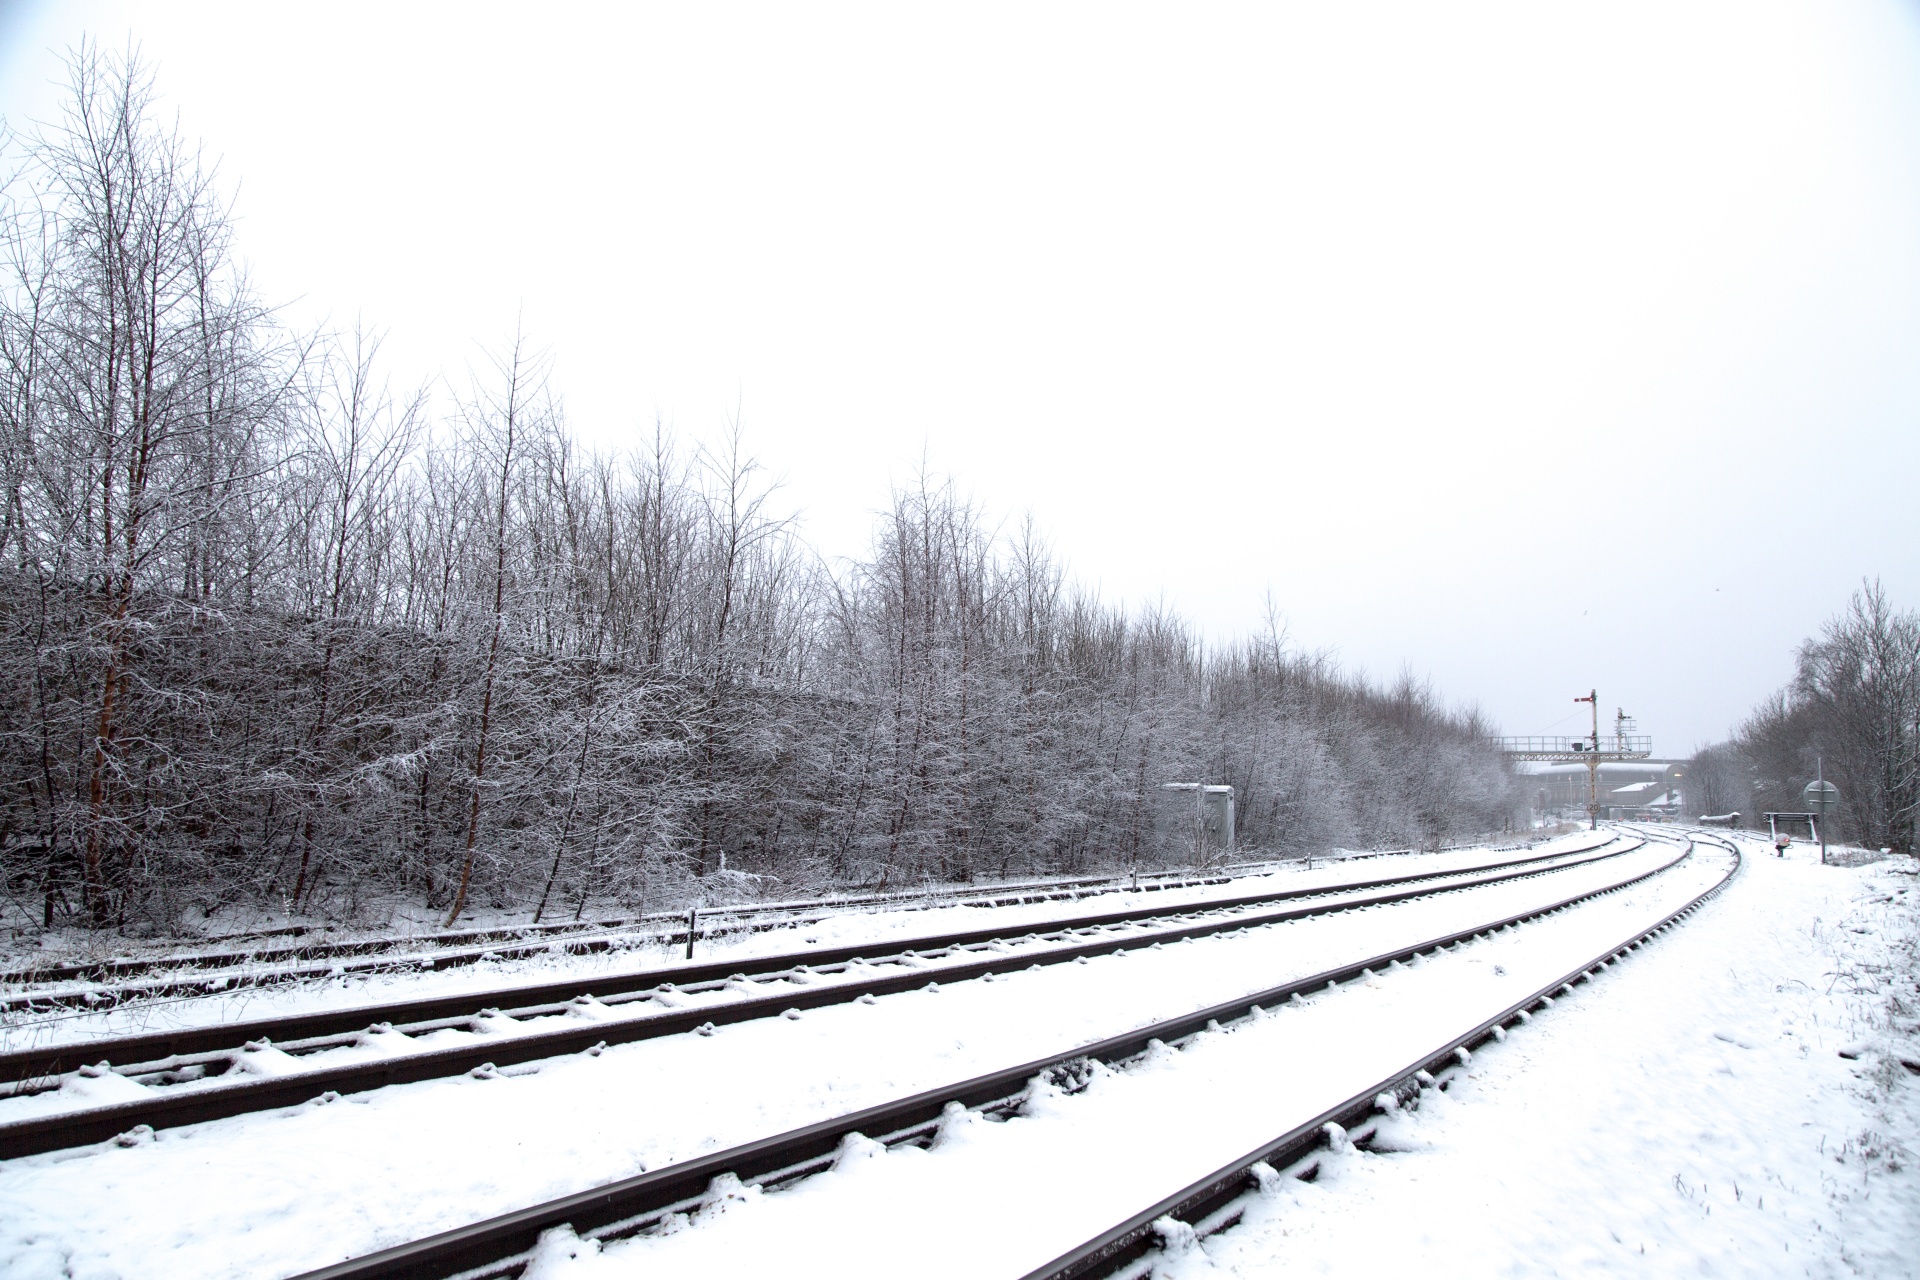 Train Tracks In Winter Free Stock Photo Public Domain Pictures